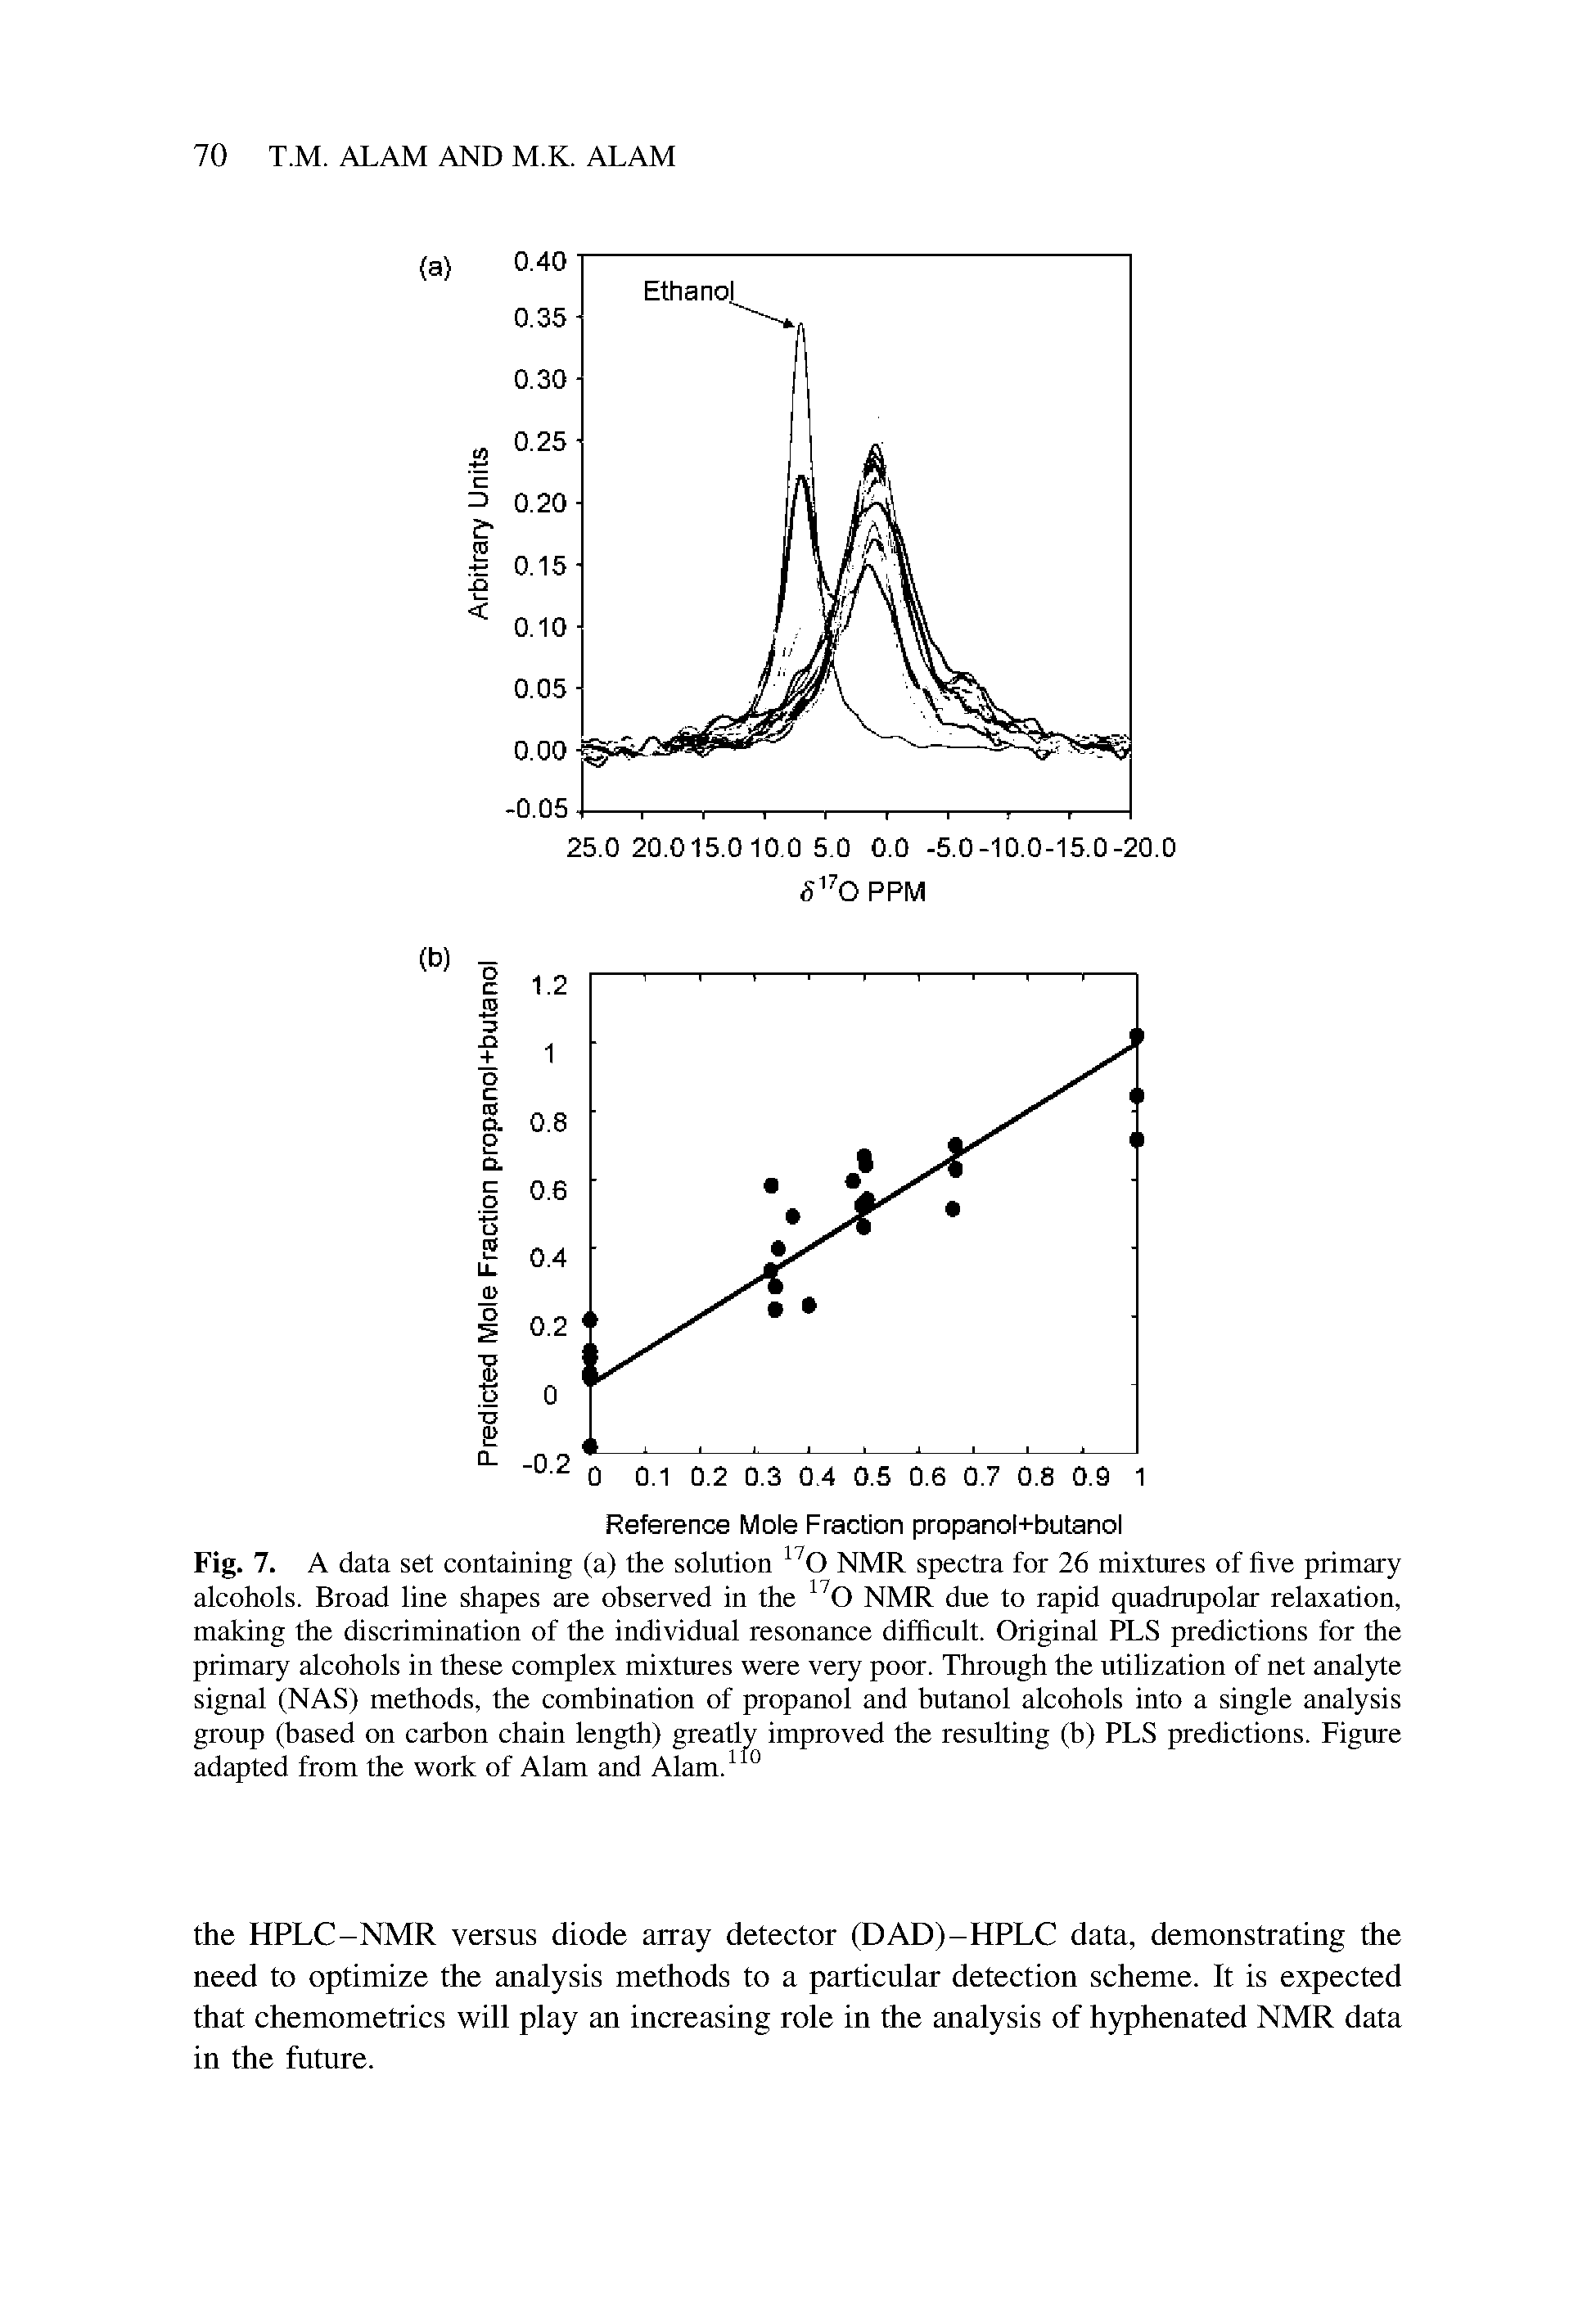 Fig. 7. A data set containing (a) the solution NMR spectra for 26 mixtures of five primary alcohols. Broad line shapes are observed in the NMR due to rapid quadrupolar relaxation, making the discrimination of the individual resonance difficult. Original PLS predictions for the primary alcohols in these complex mixtures were very poor. Through the utilization of net analyte signal (NAS) methods, the combination of propanol and butanol alcohols into a single analysis group (based on carbon chain length) greatly improved the resulting (b) PLS predictions. Figure adapted from the work of Alam and Alam. ...